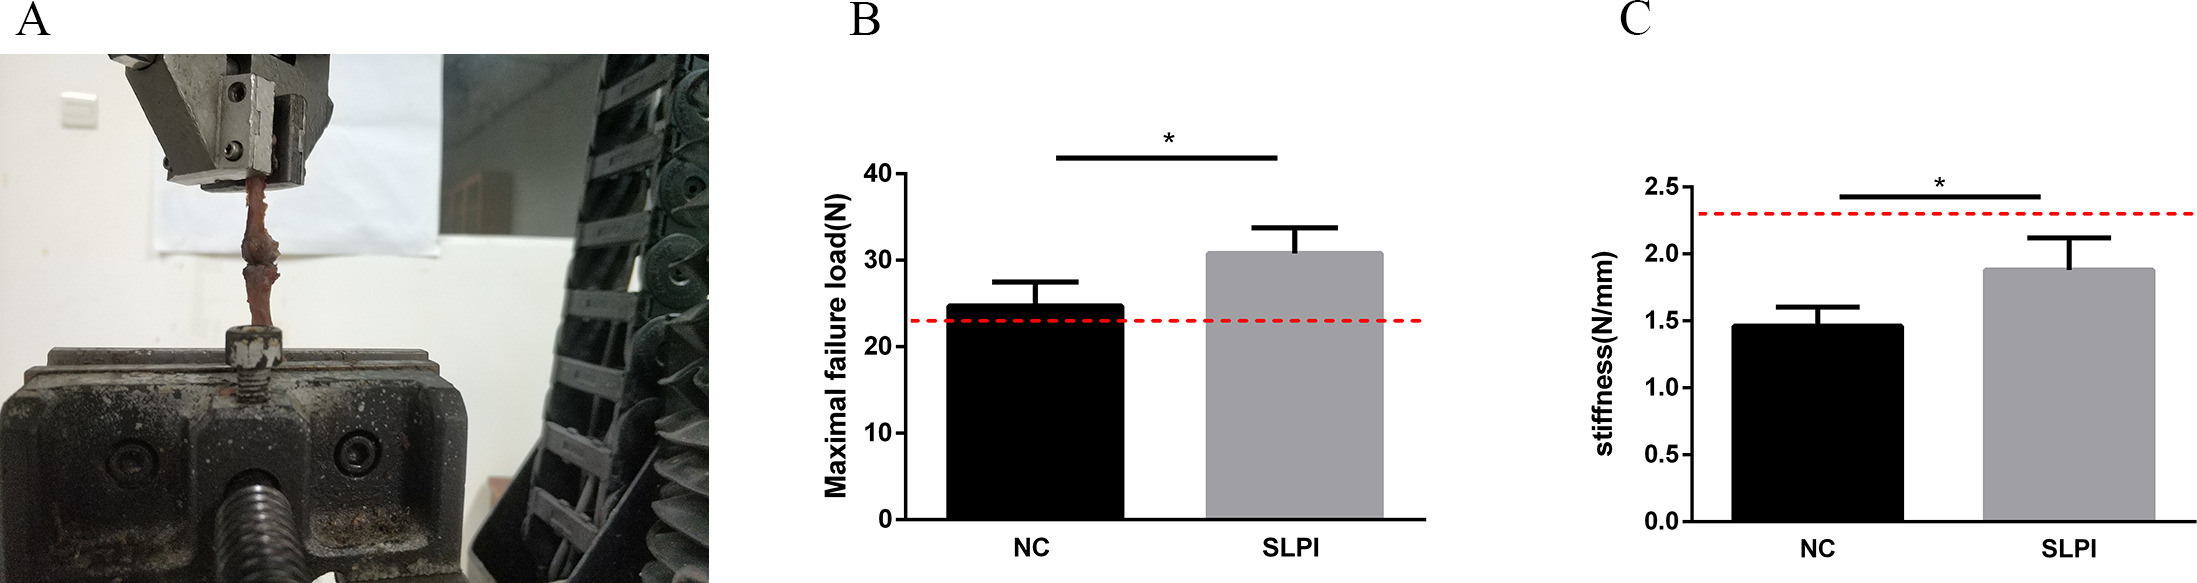 Fig. 2 
            a) Biomechanical testing performed using a biomaterial testing system. b) Maximum tensile force and c) stiffness of the secretory leucocyte protease inhibitor (SLPI) group and the negative control (NC) group were recorded. Both the maximum tensile force and stiffness were higher in the SLPI group. Results are presented as mean and standard deviation (n = 6), *p < 0.05. The red dashed line in b) and c) indicates maximum failure tension and stiffness of the intact anterior cruciate ligament.
          